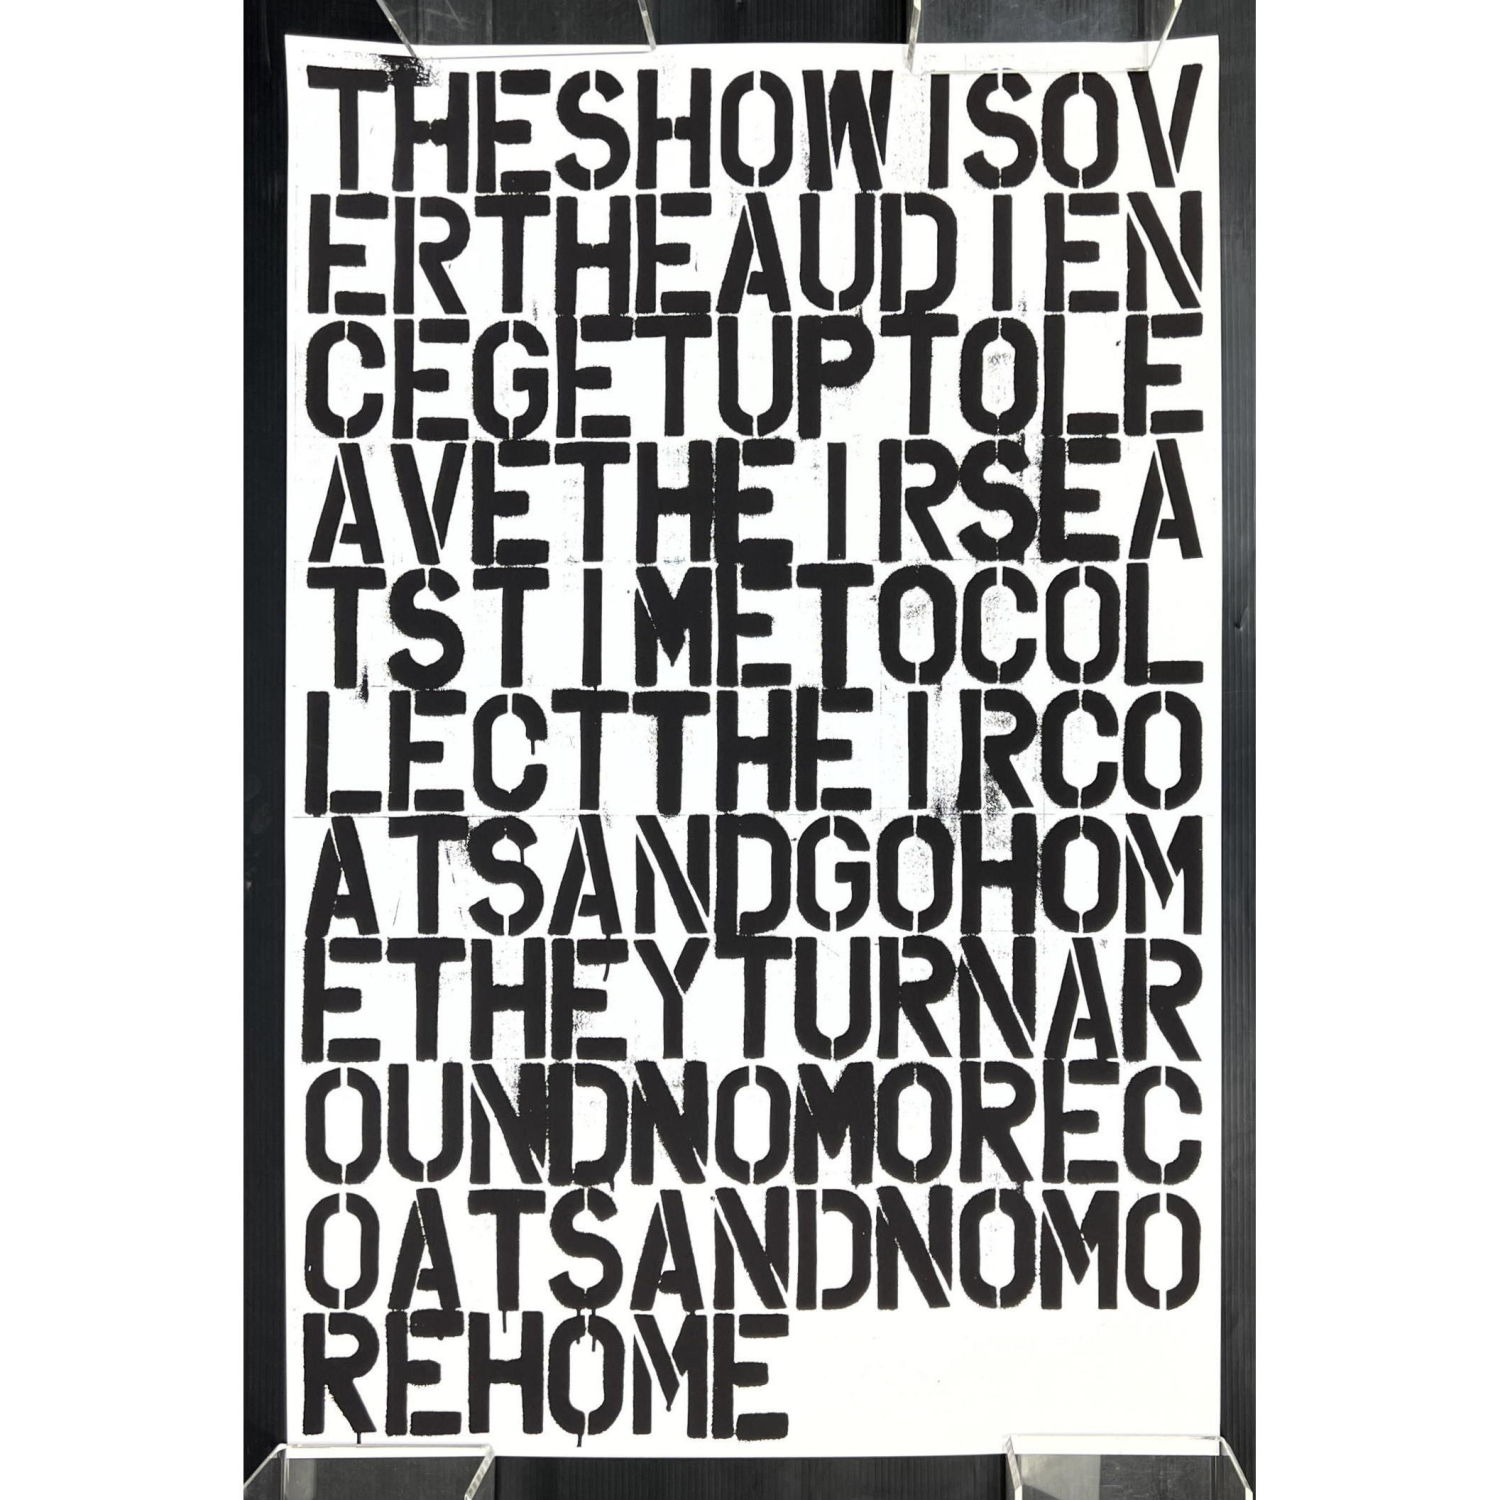 untitled poster, 1993 Christopher